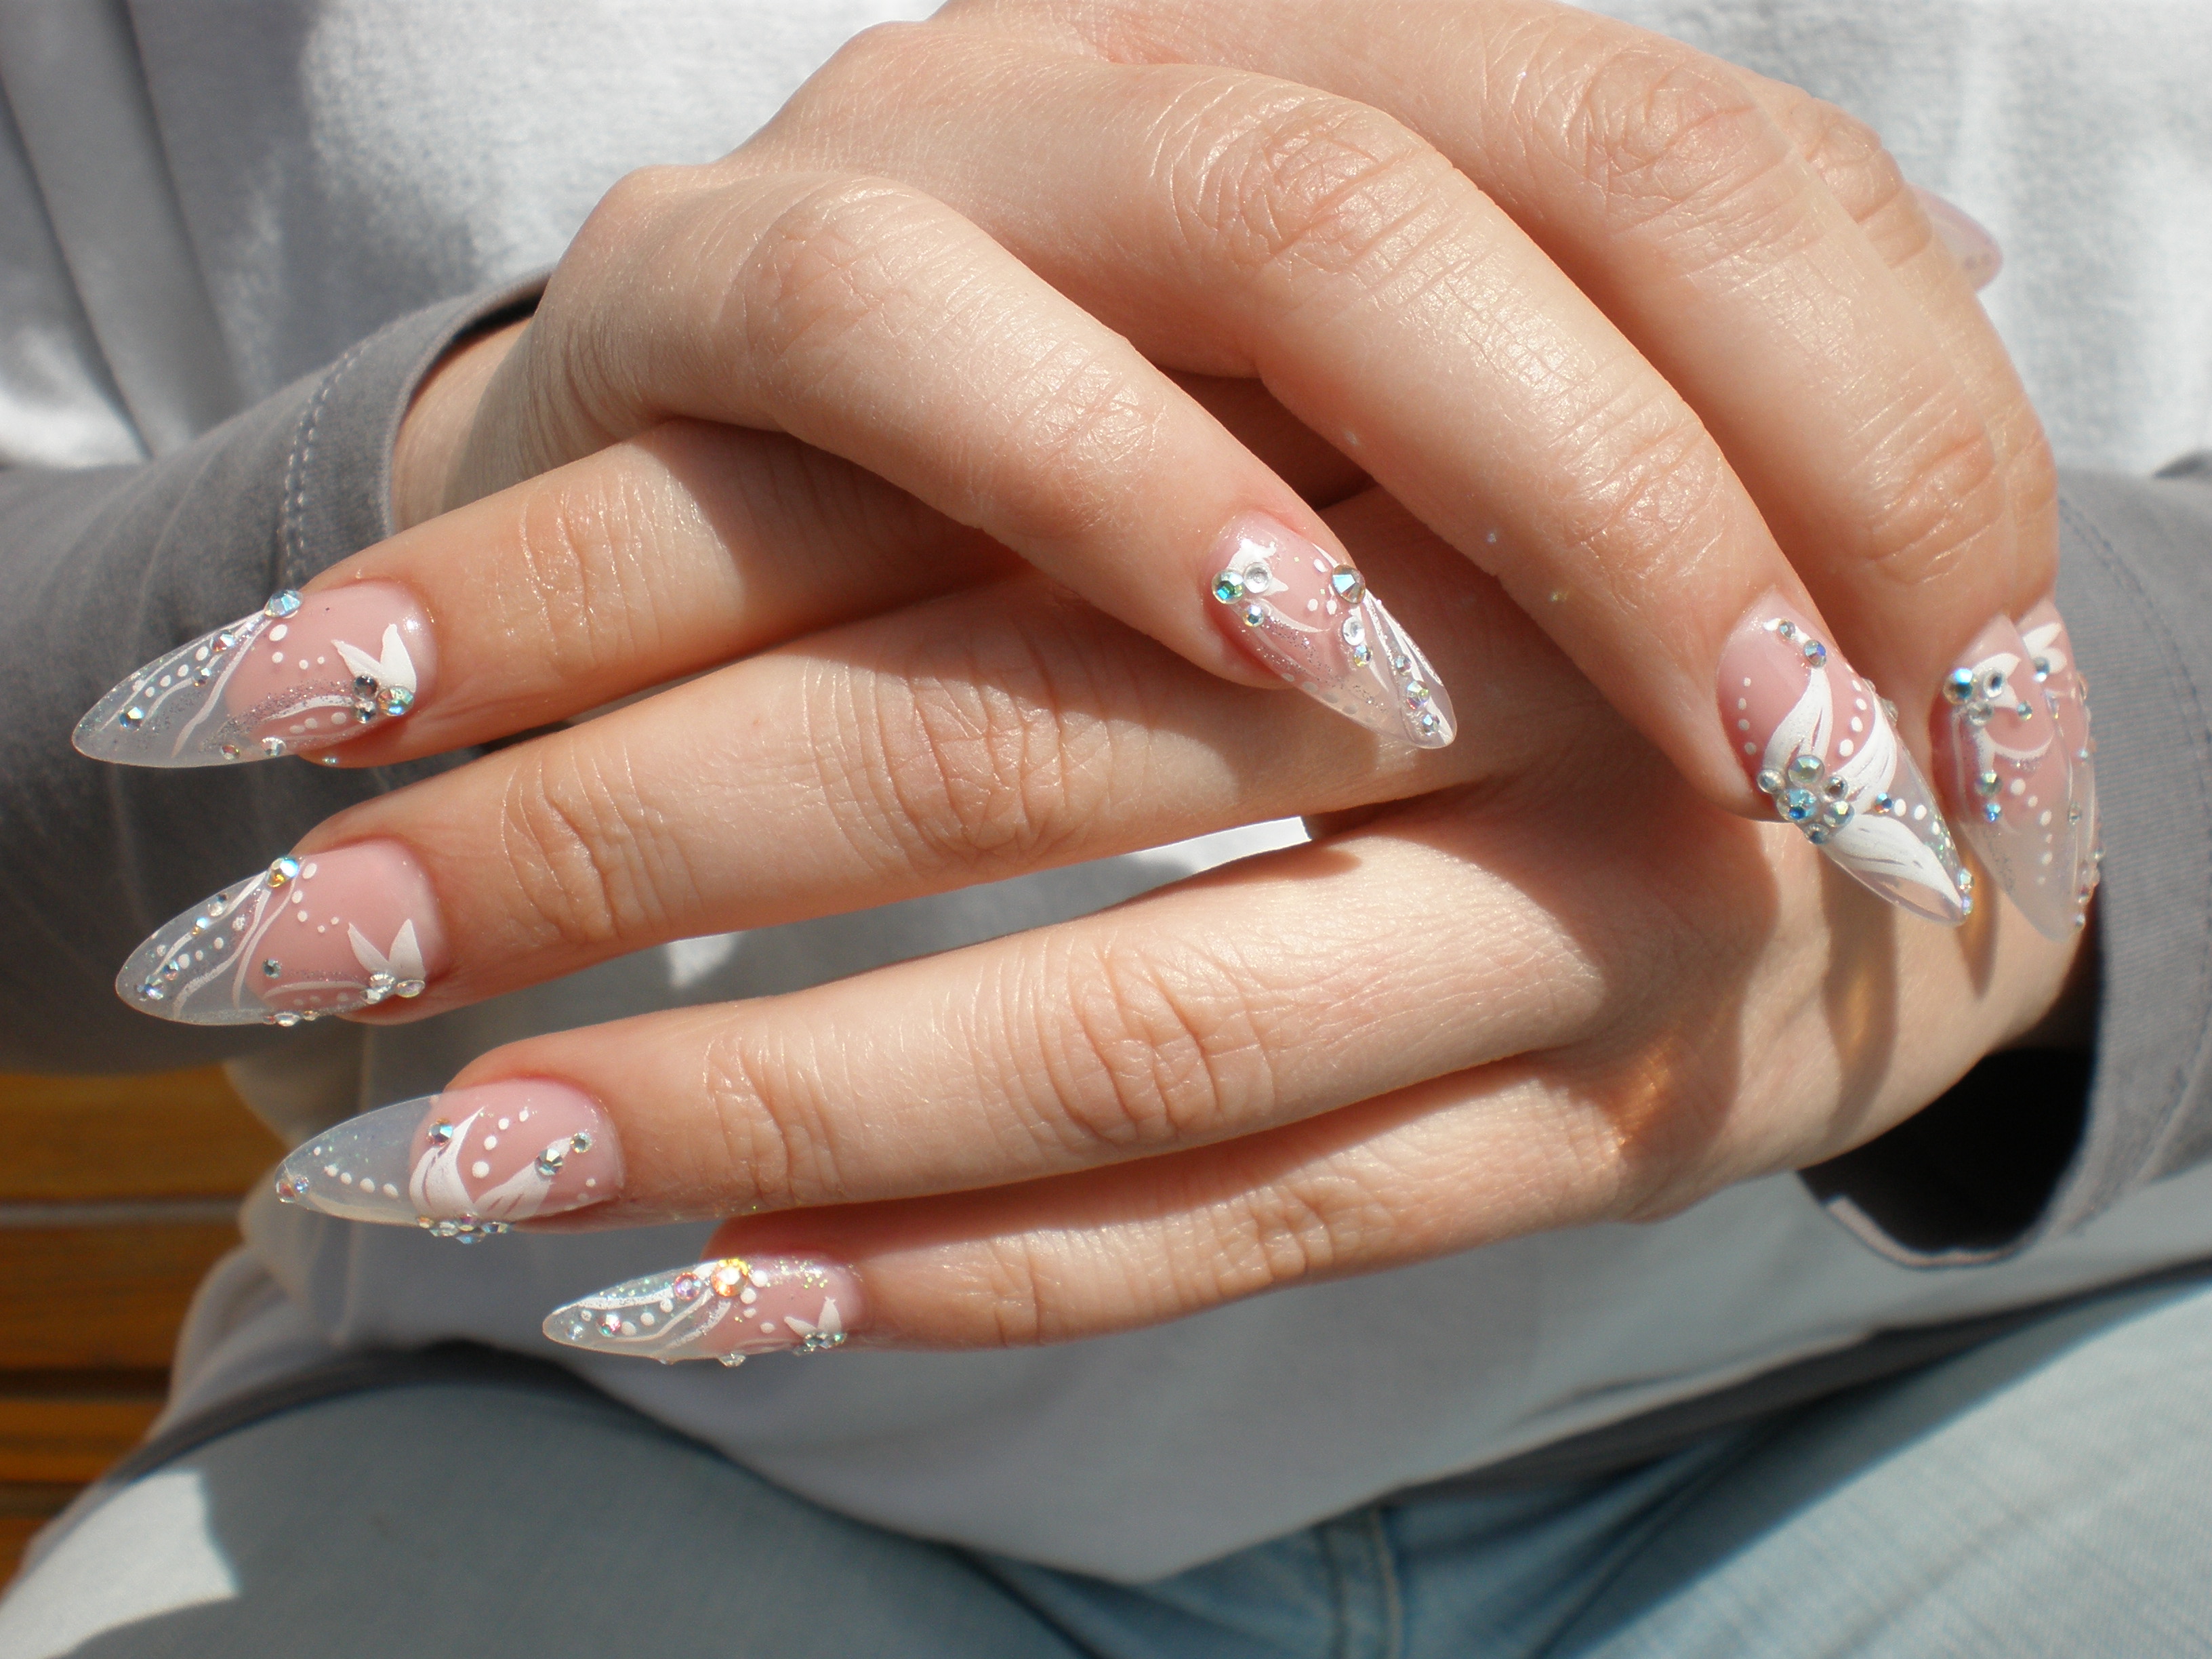 3. Crystal Accent Nails - wide 5